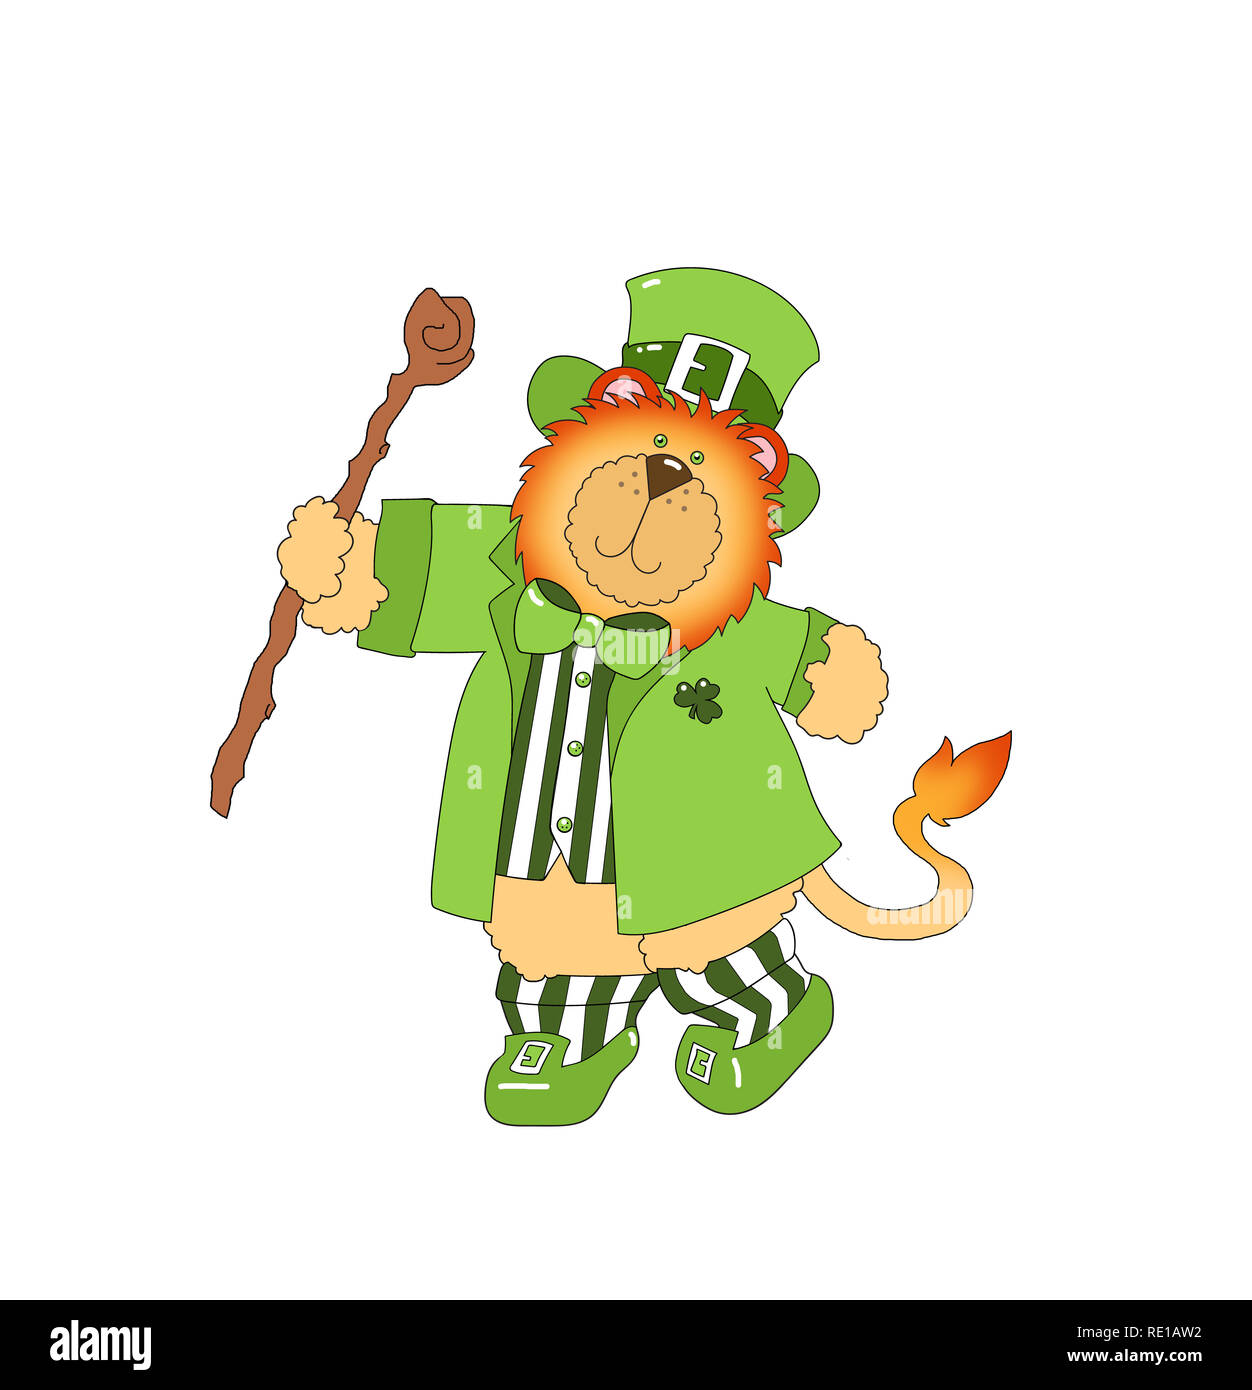 Clip art illustration of a cute lion dressed as a leprechaun and dancing on a white background. Stock Photo